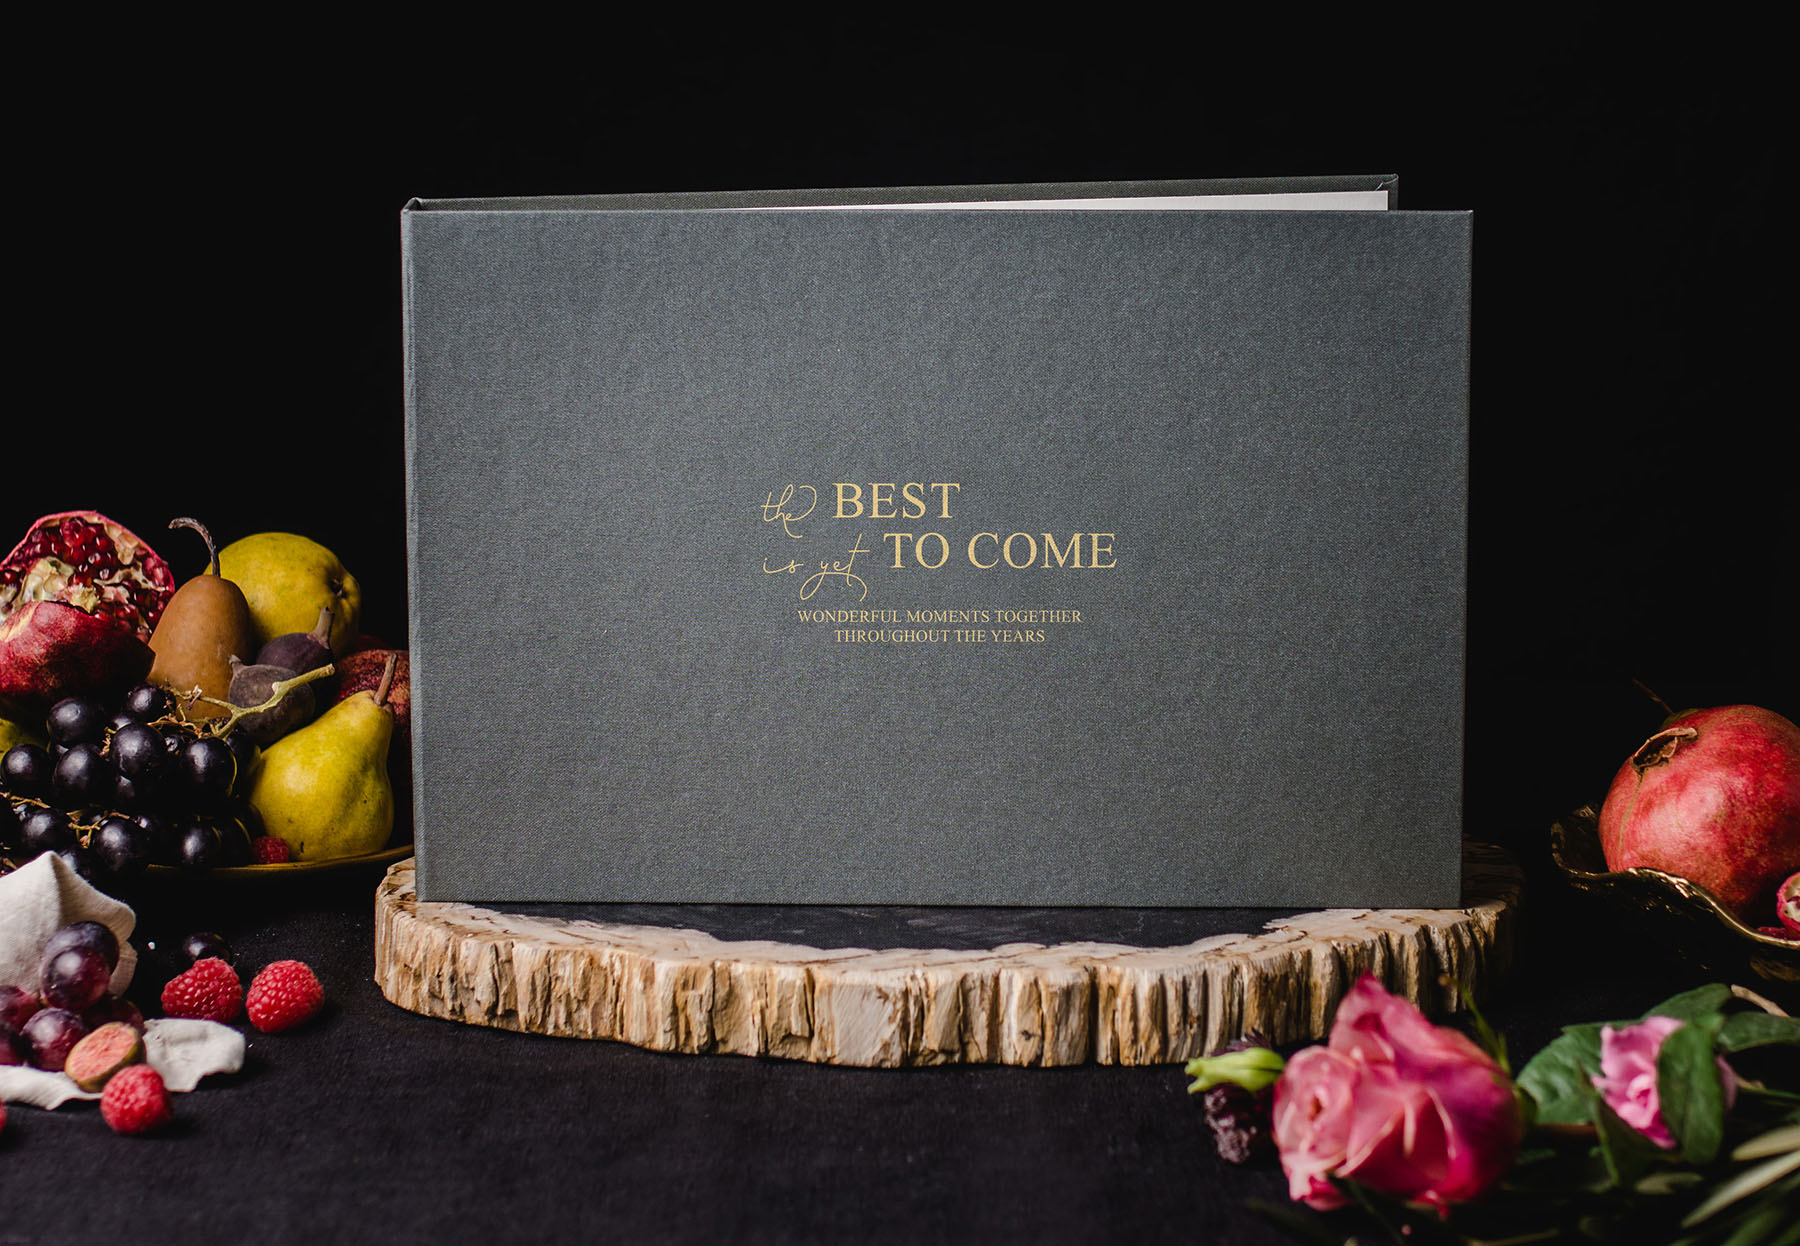 Best Is Yet to Come Wedding anniversary Book from Art of Etiquette